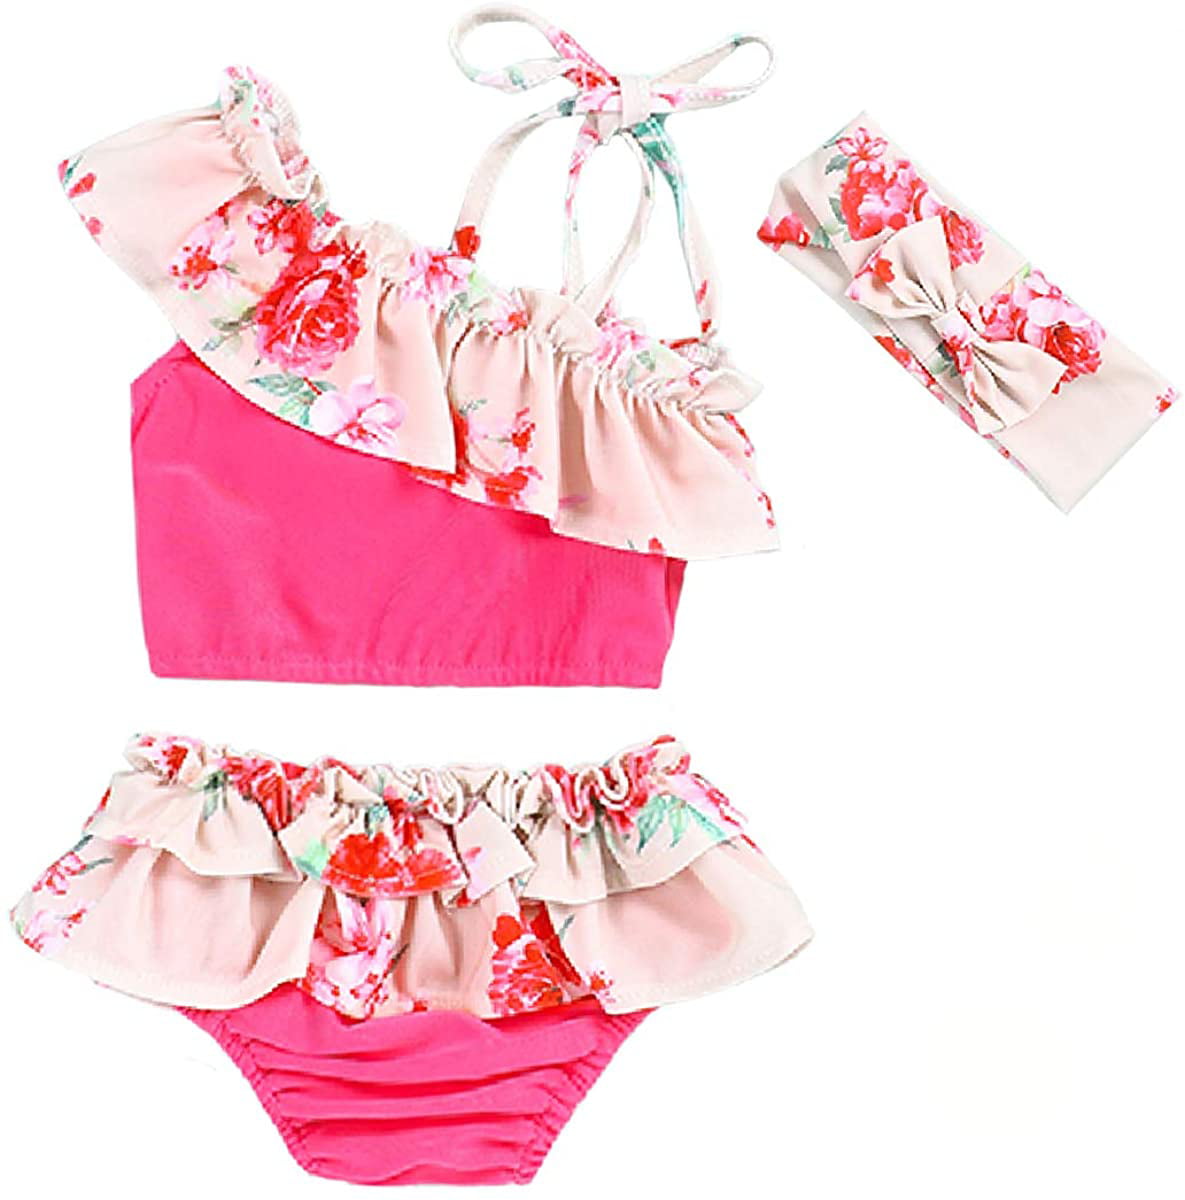 Toddler Baby Girl Swimsuit Bikini Ruffle Floral Tops Skirt with Headband Swimwear Bathing Suit Summer Outfits Set 